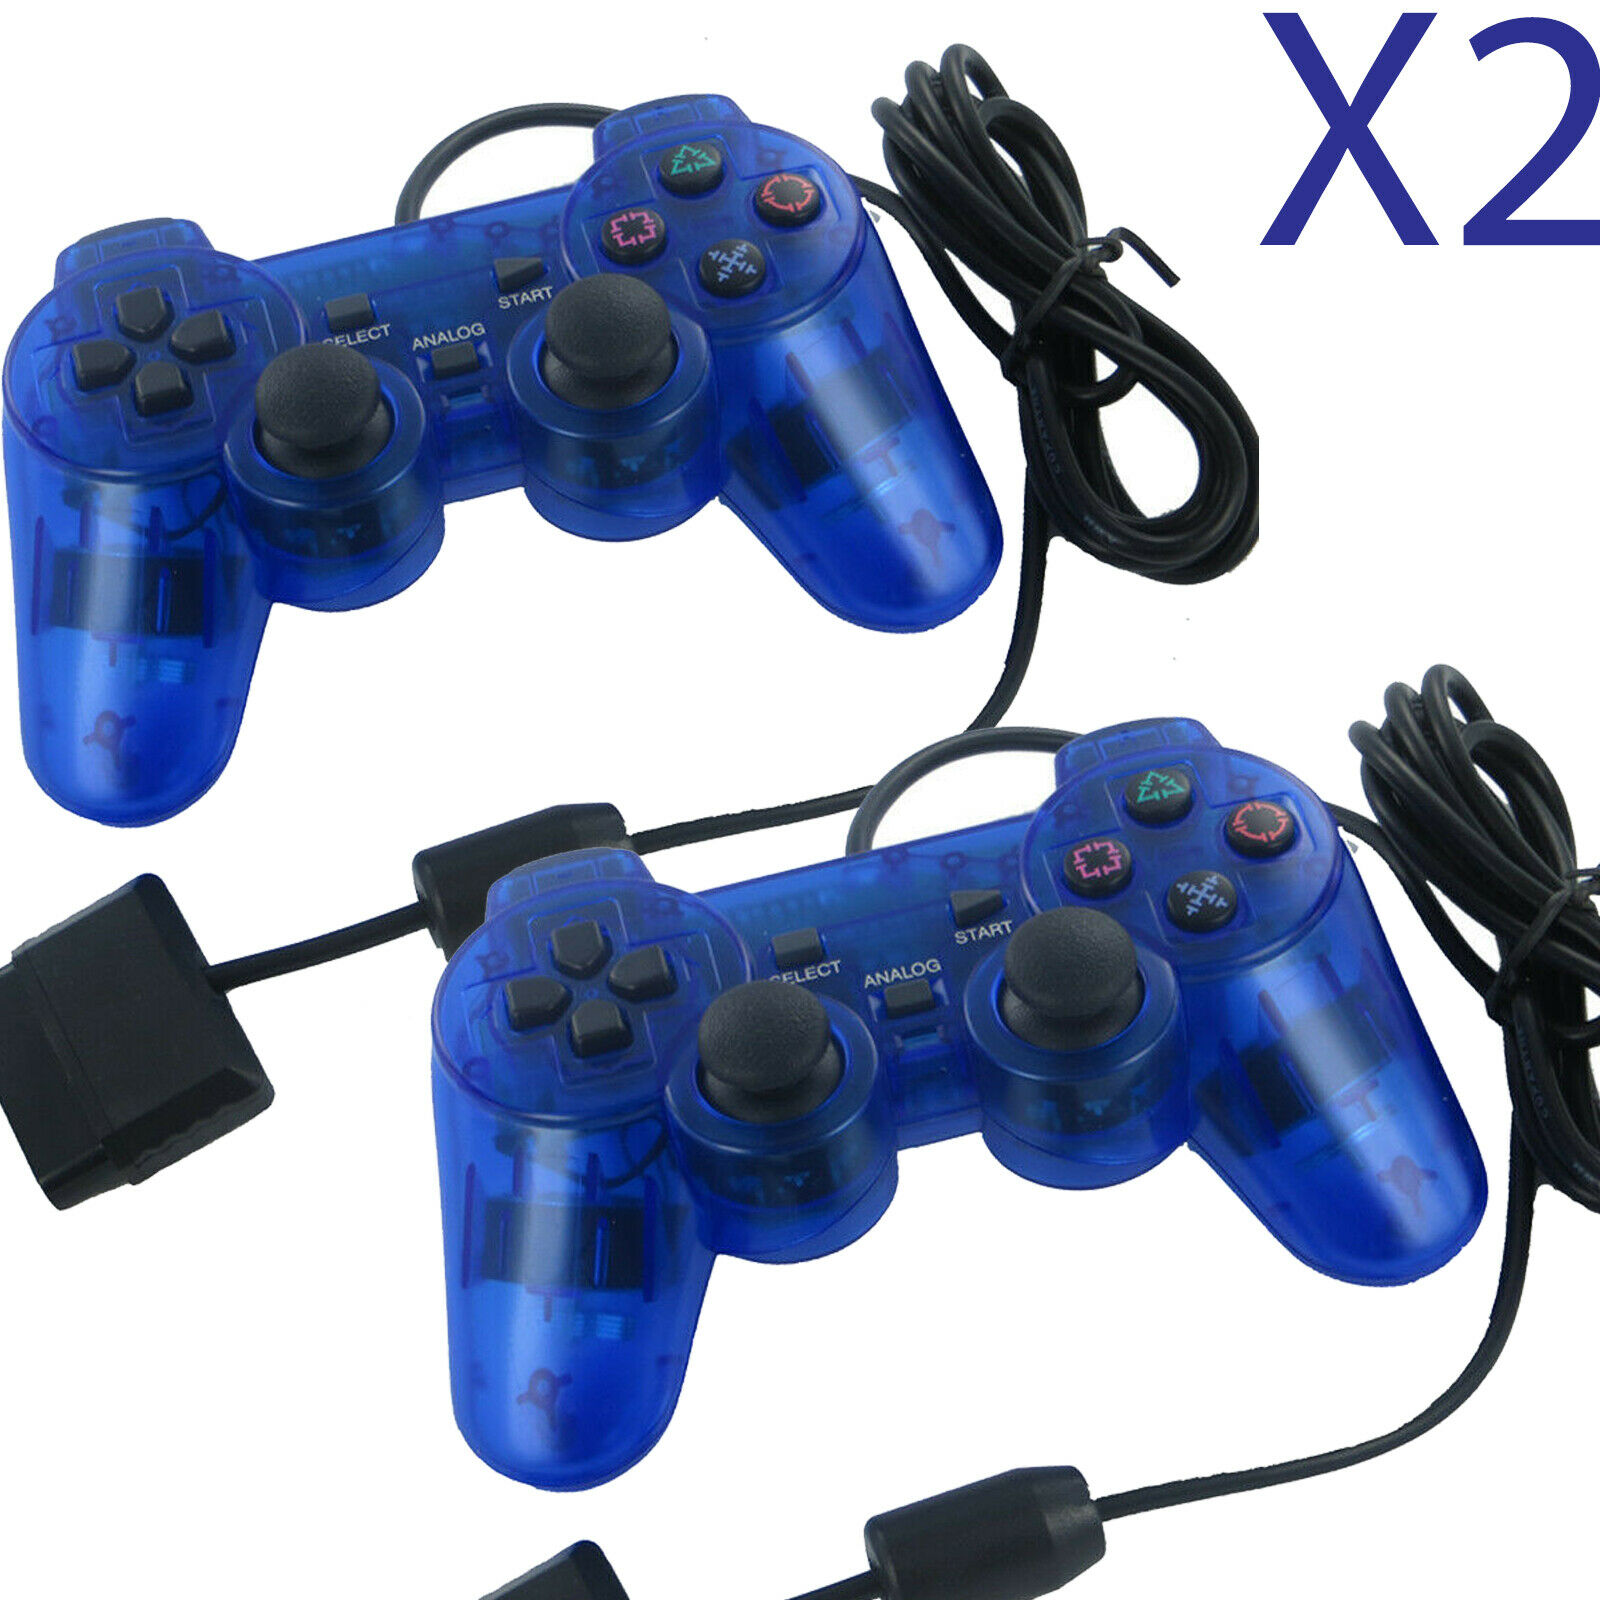 2x Blue Twin Shock Game Controller Joypad Pad For Sony Ps2 Playstation 2